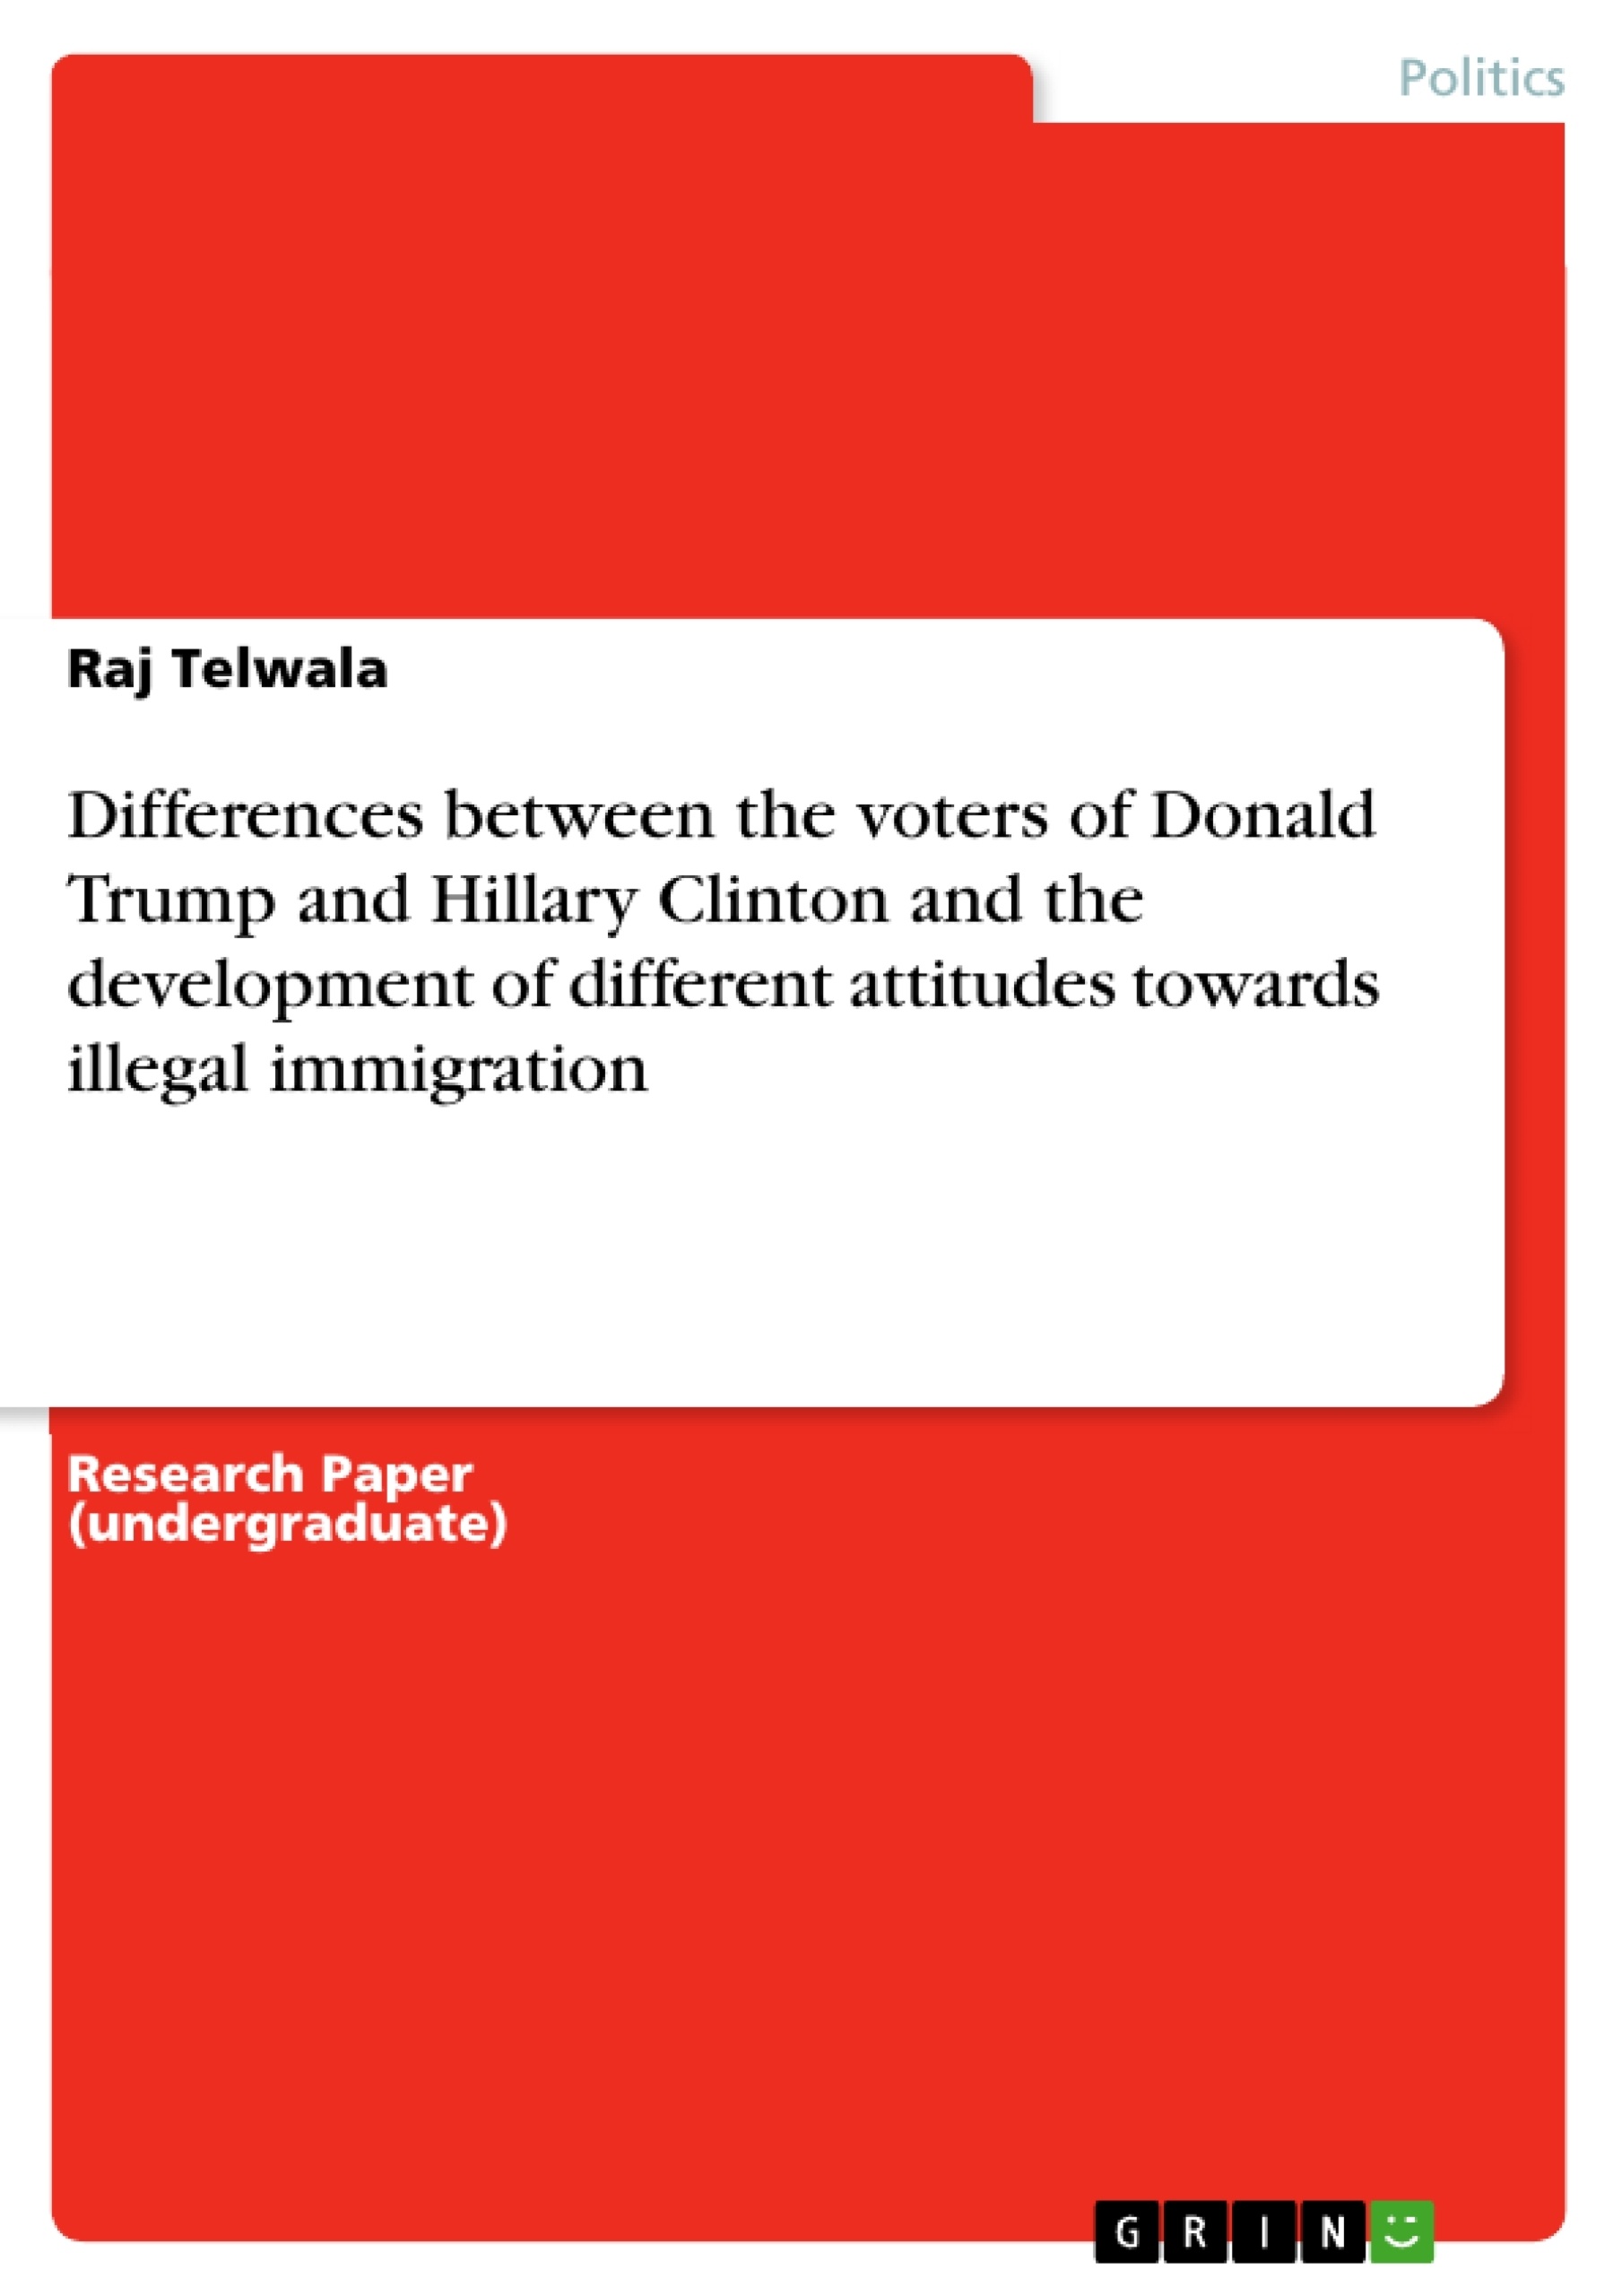 Title: Differences between the voters of Donald Trump and Hillary Clinton and the development of different attitudes towards illegal immigration